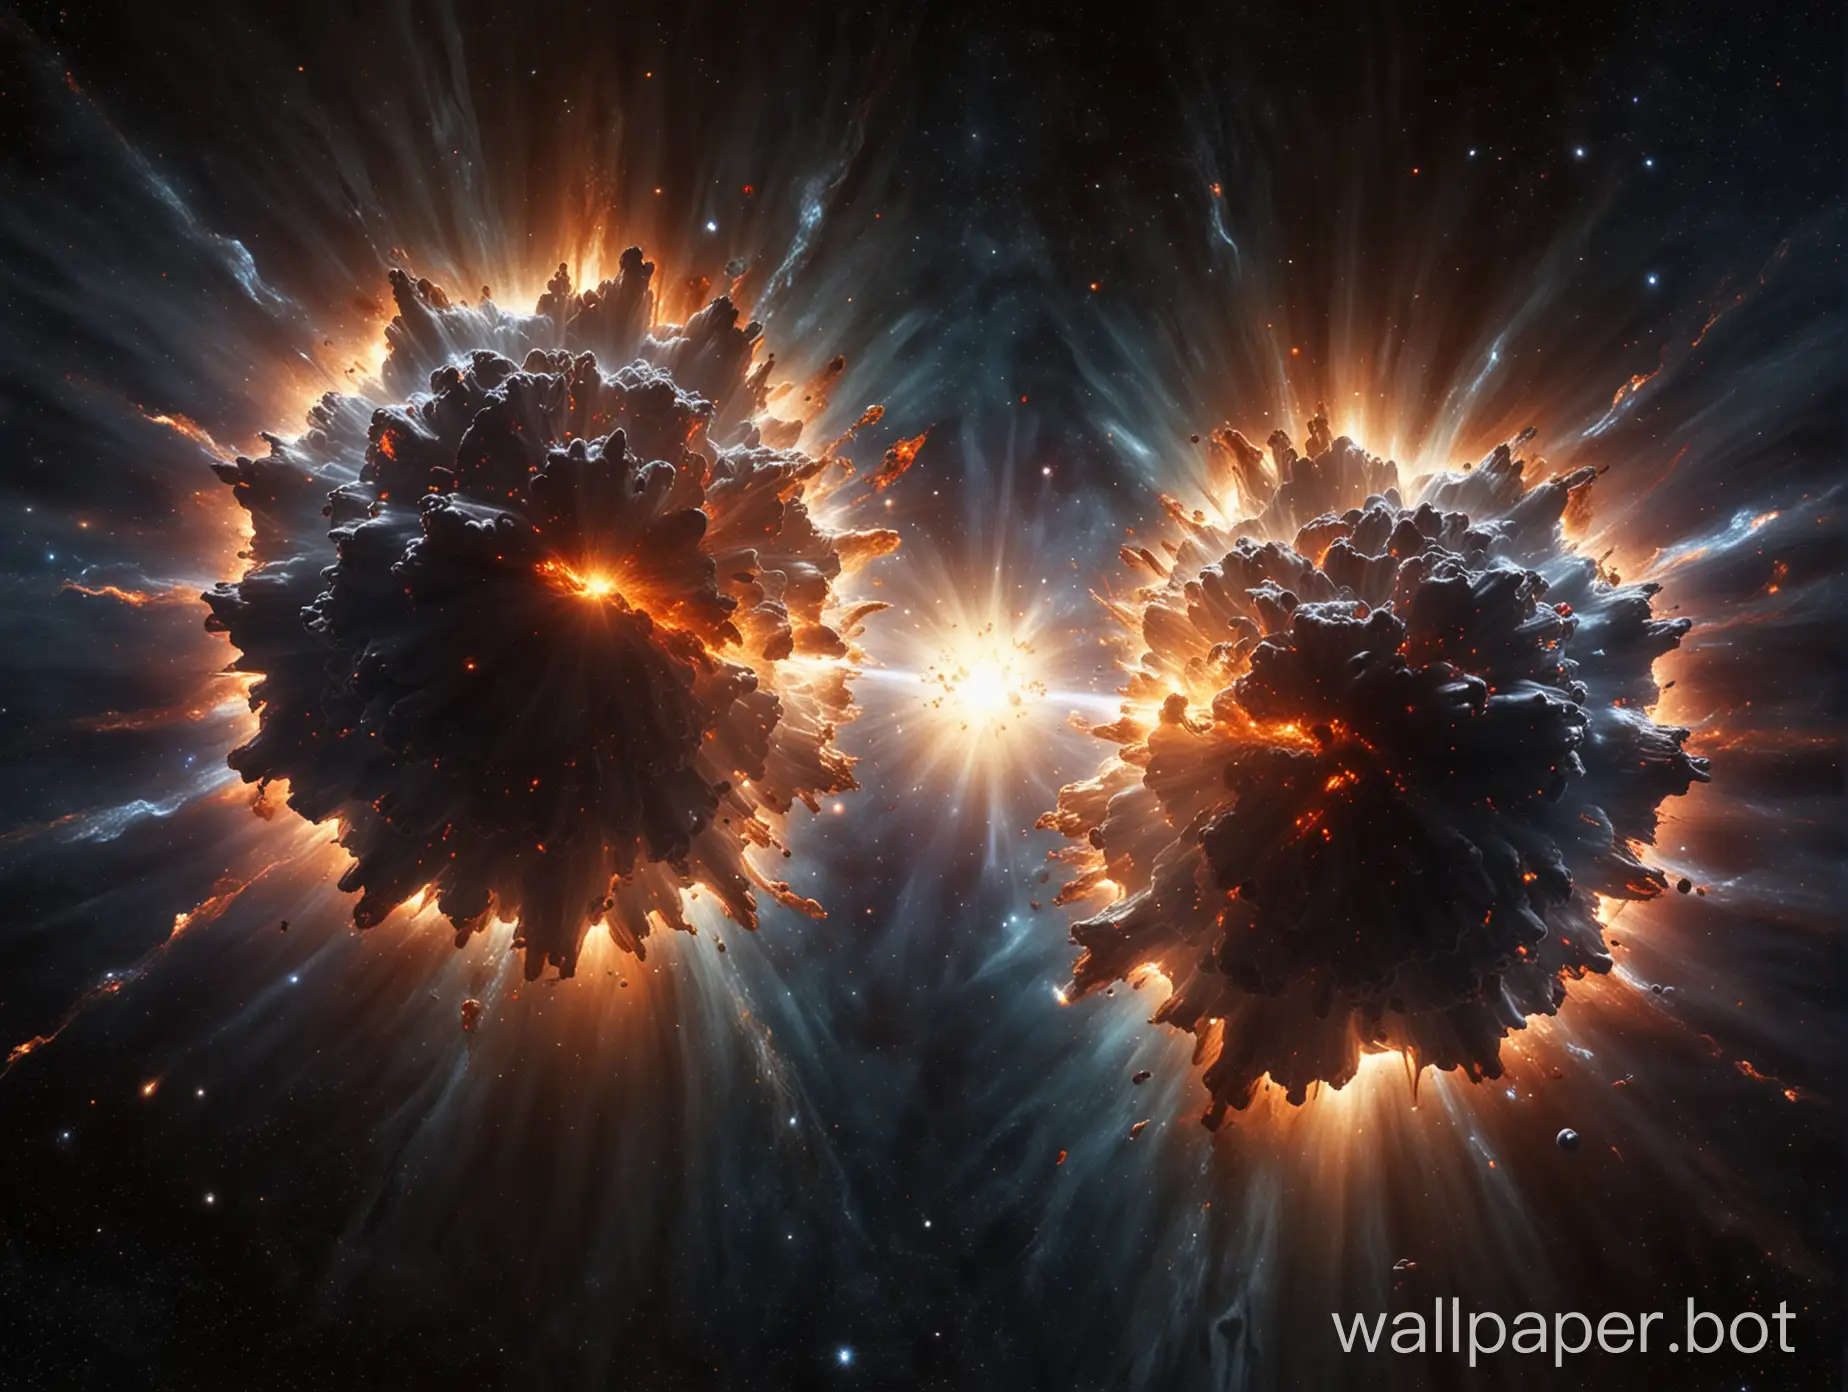 the collision of two supernova stars in space, photorealism, the blast wave spreading in different directions